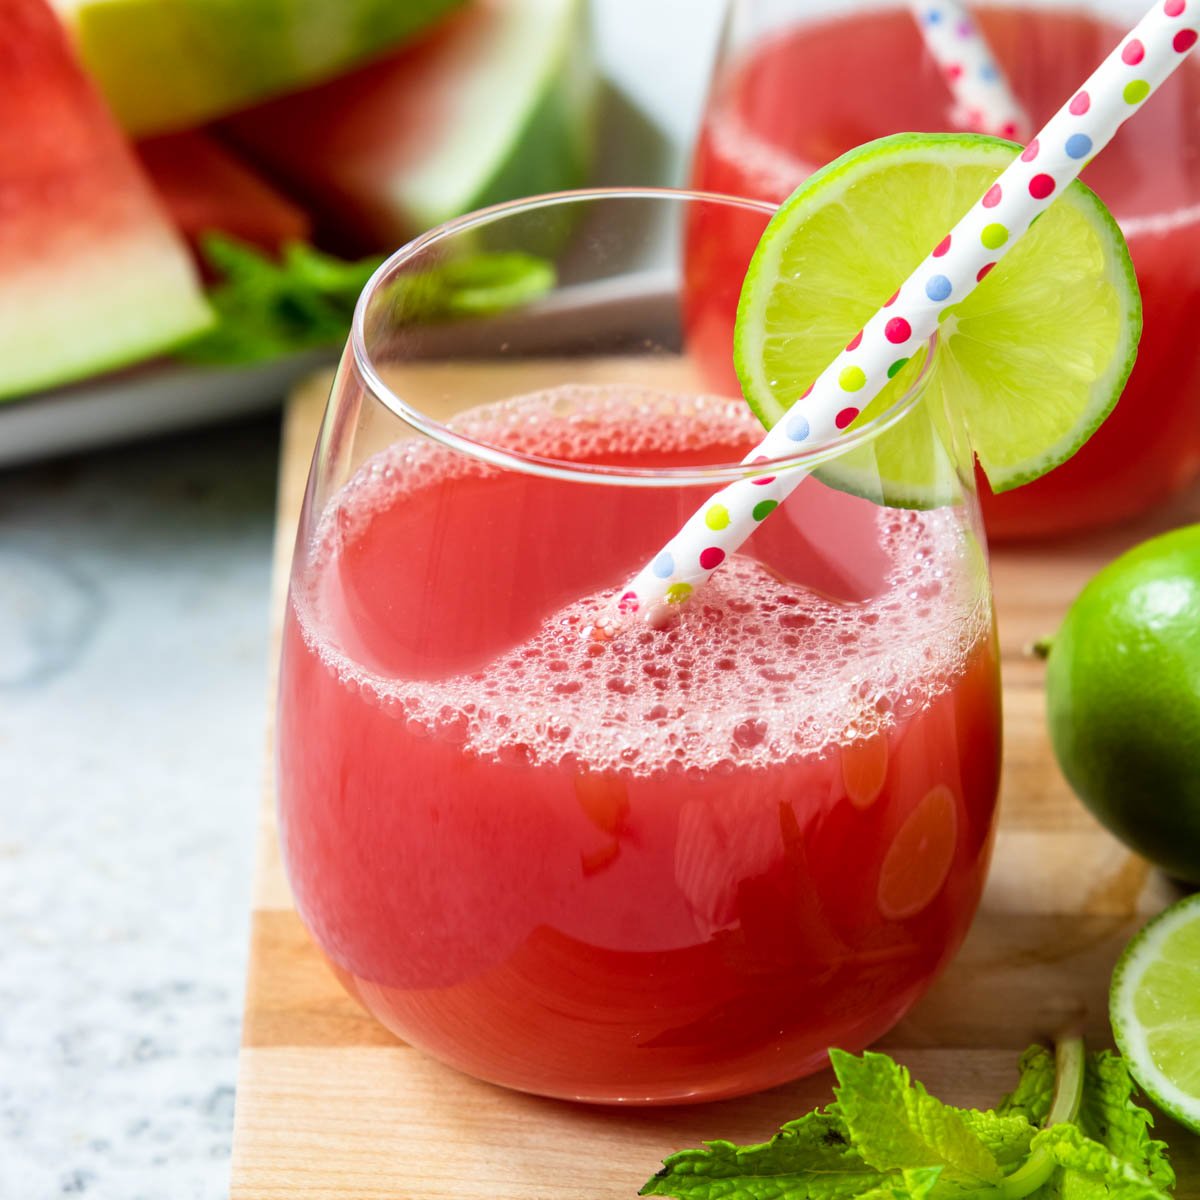 How To Make Watermelon Juice Without A Blender